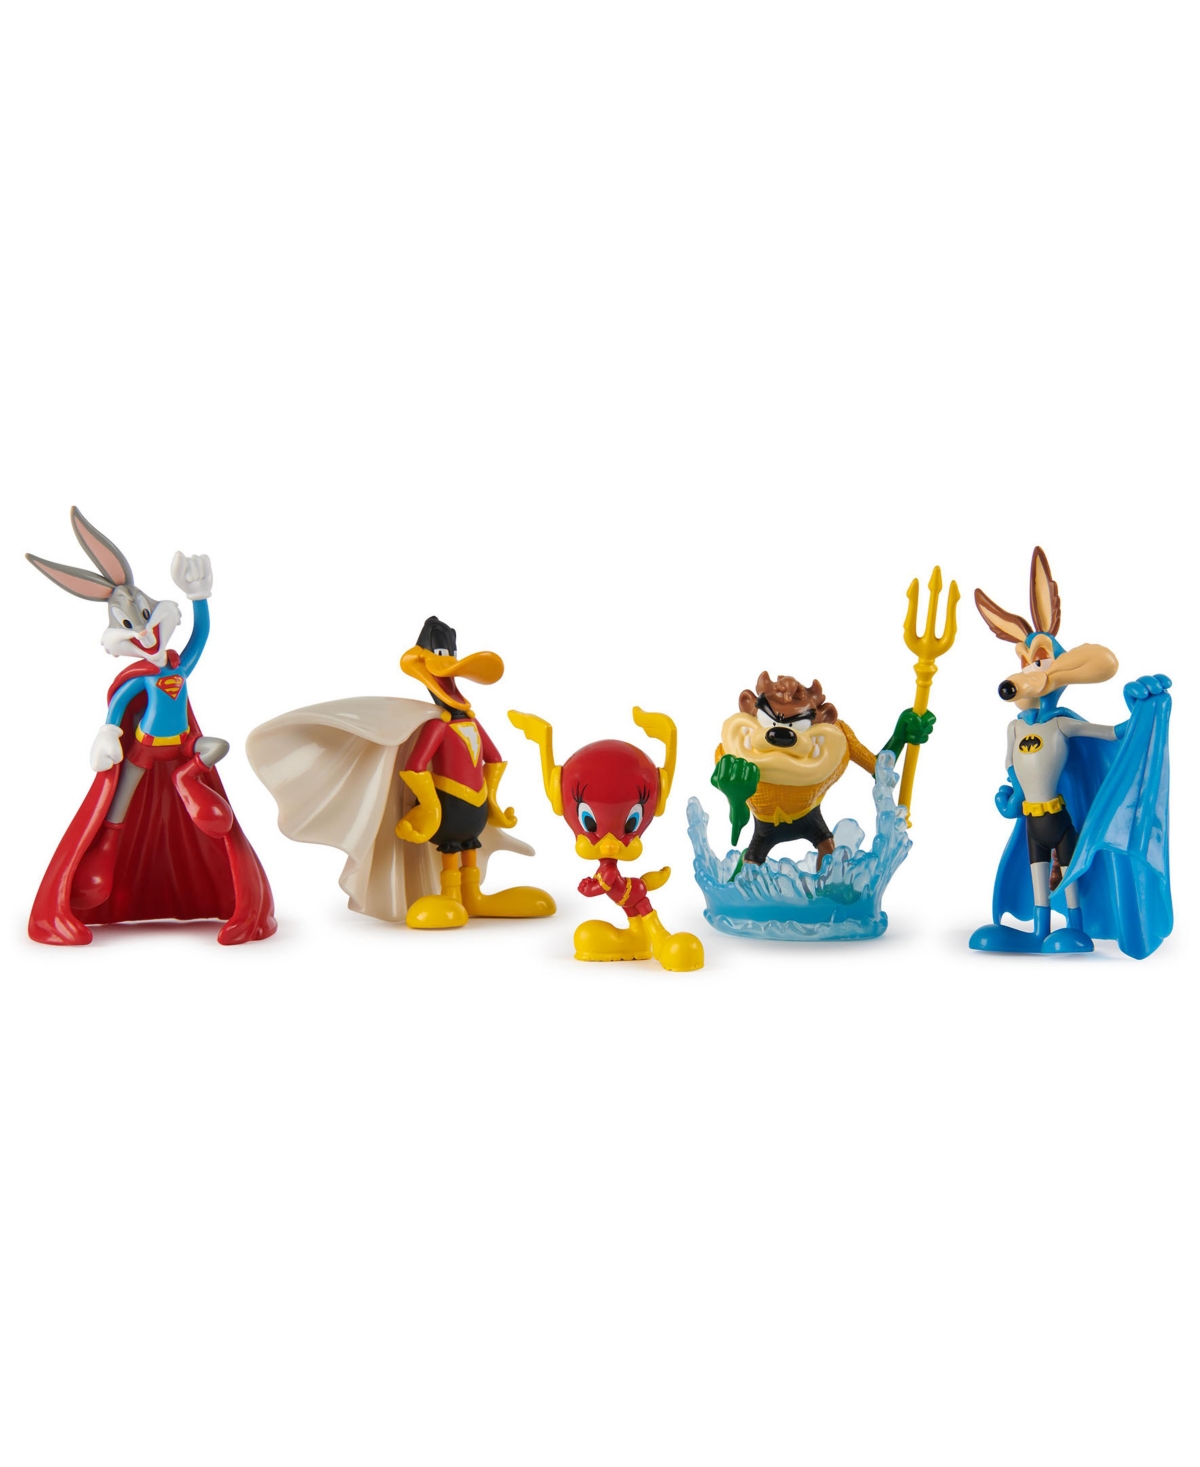 Shop Dc Comics , Looney Tunes Mash-up Pack, Limited Edition Wb 100 Years Anniversary, 5 Looney Tunes X Dc Figures In Multi-color